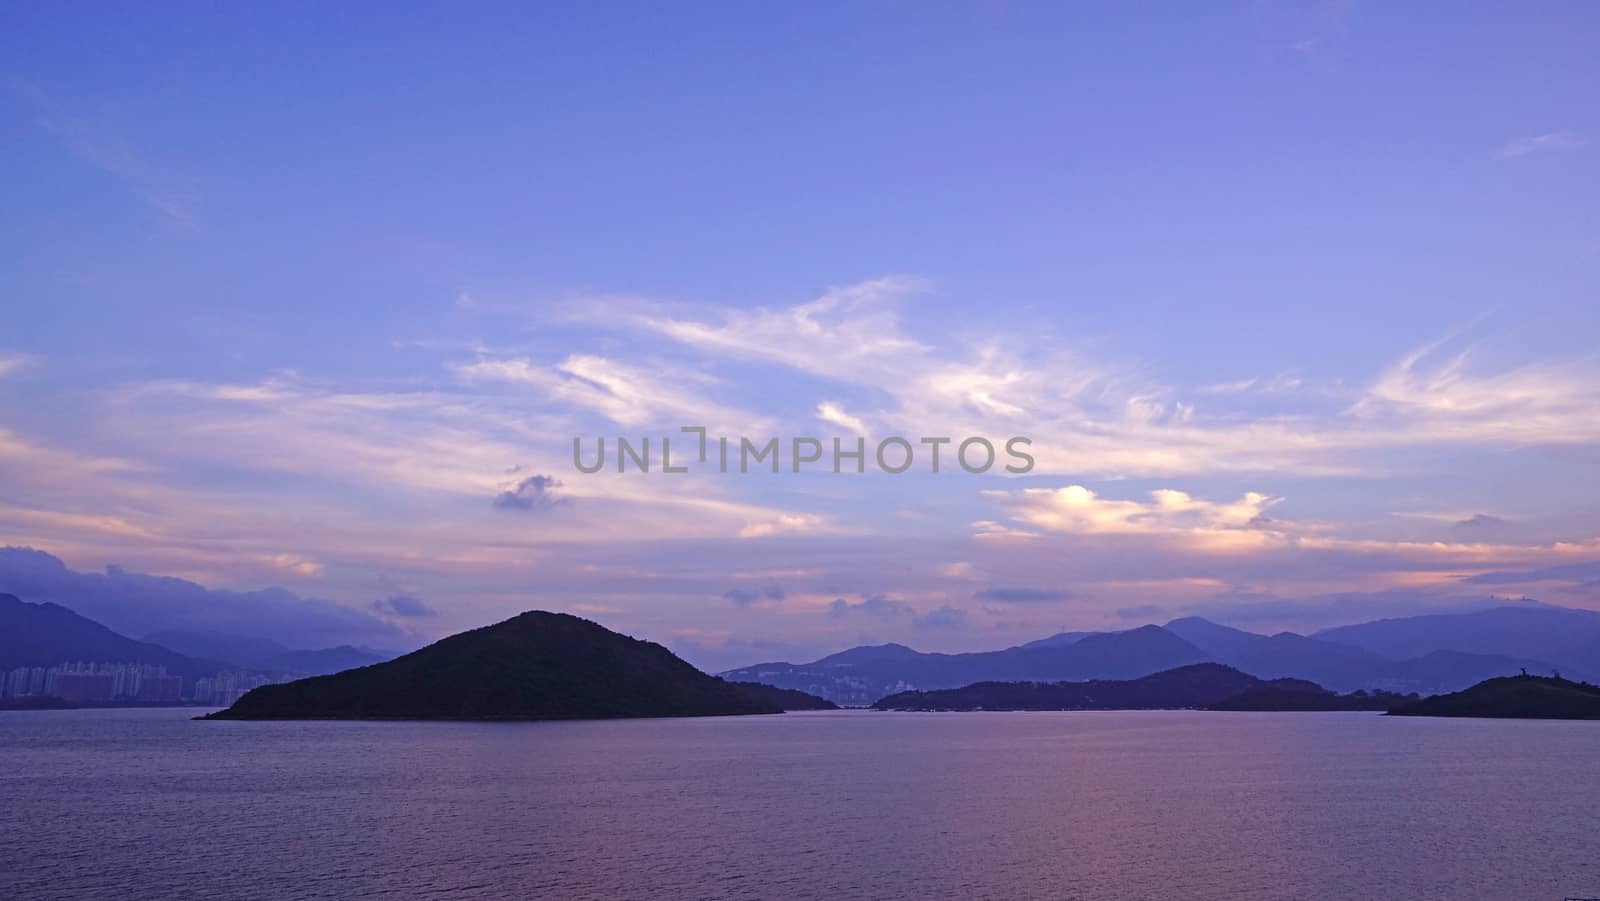 The natural landscape photography, mountains, ocean, clouds and sky